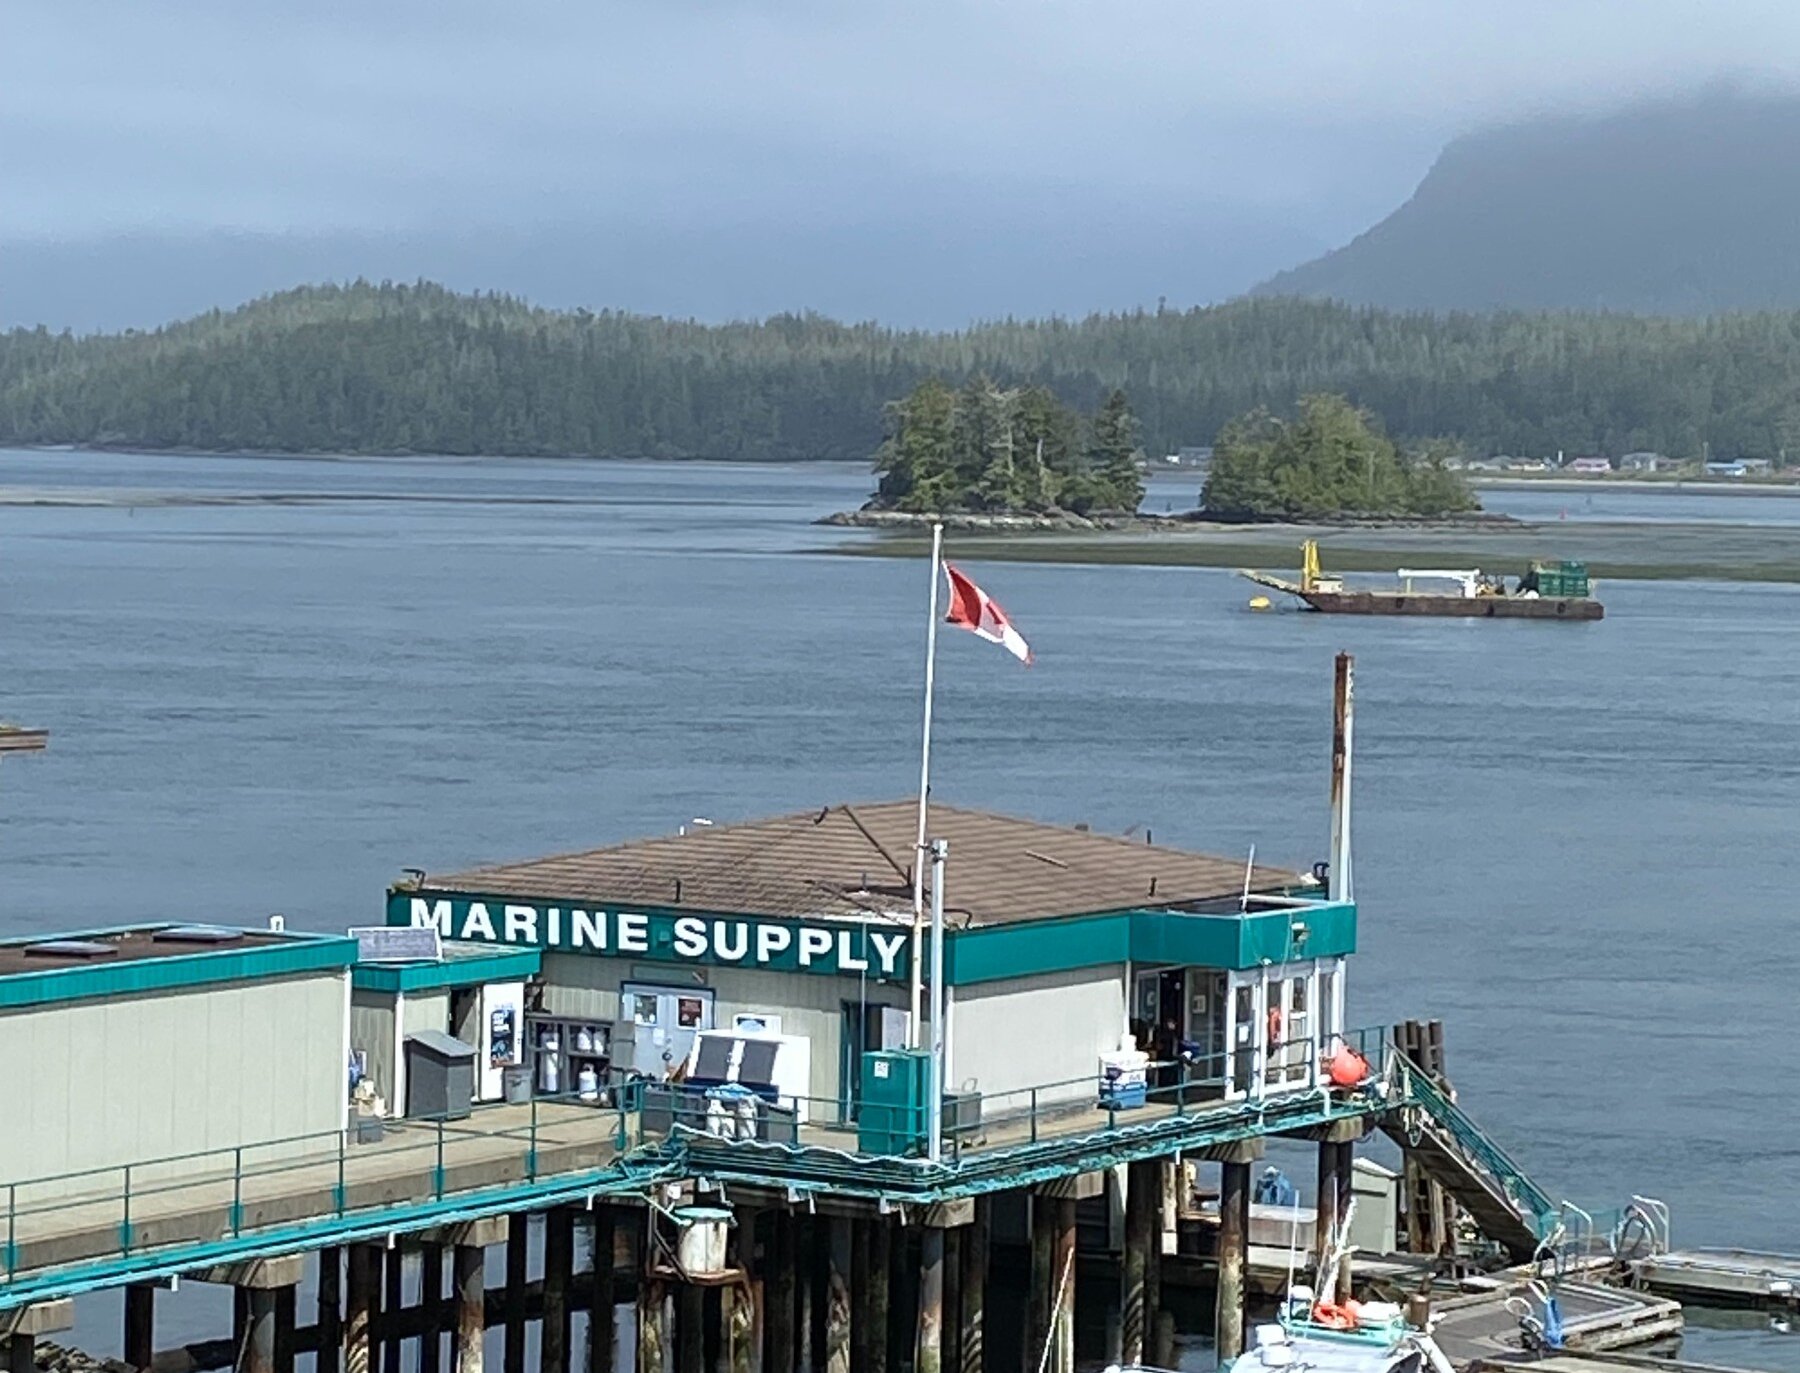 Marine supply store on a dock with Canada flag and islands in the background